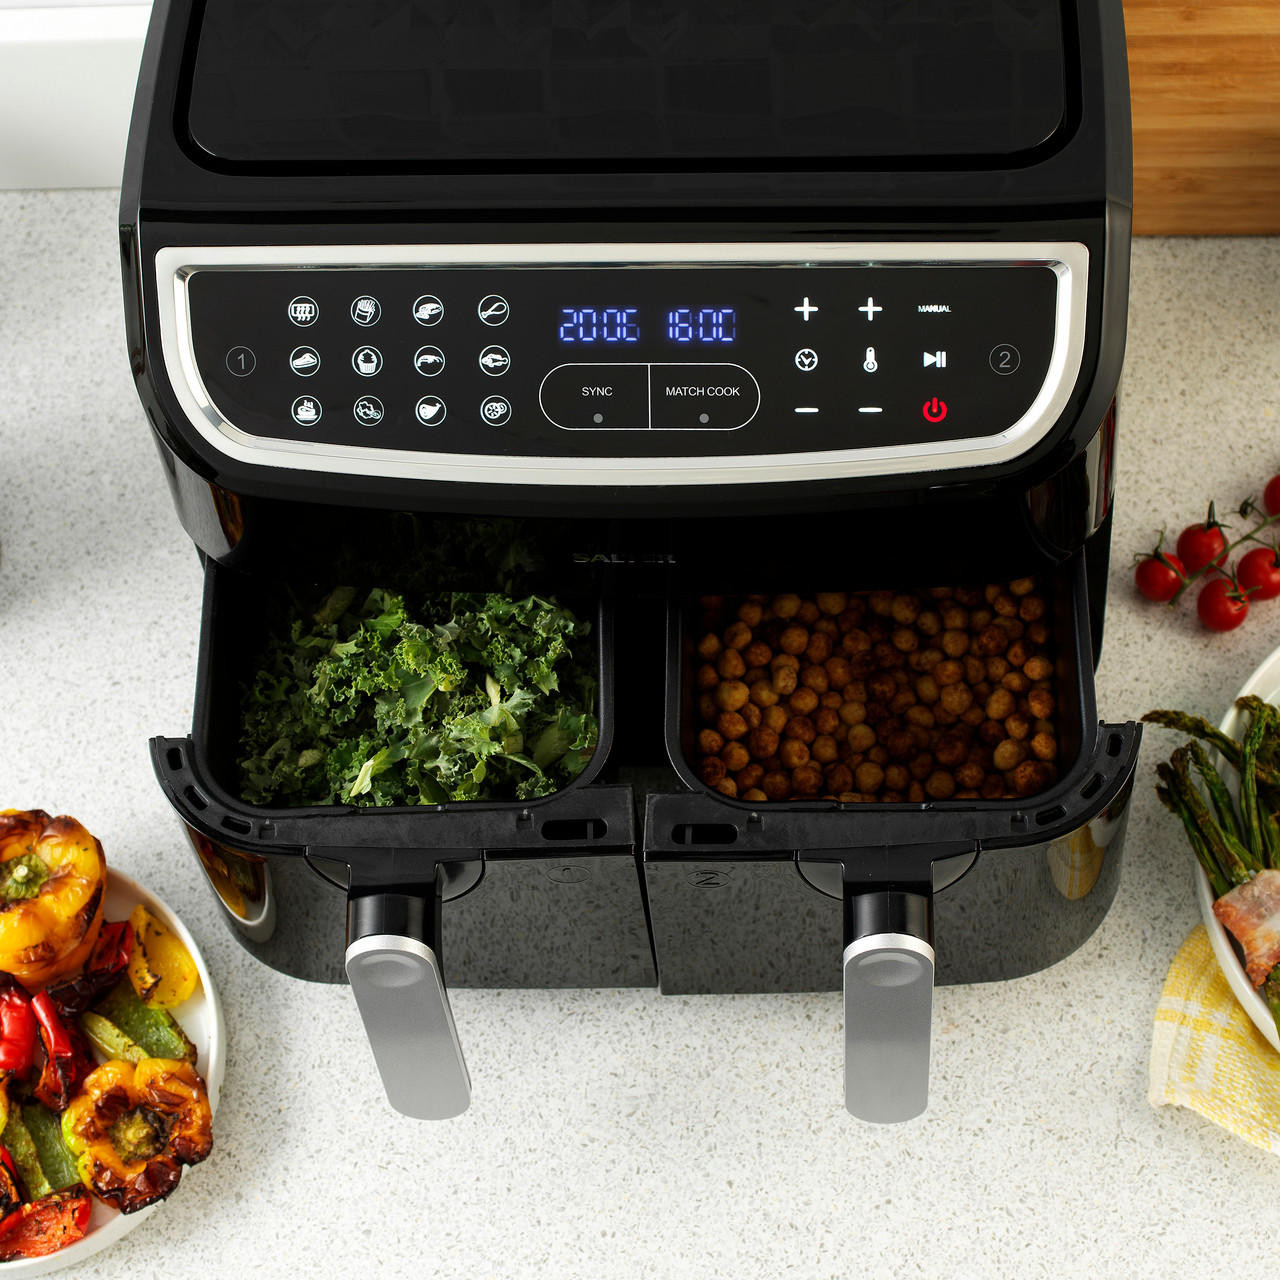 https://cdn11.bigcommerce.com/s-5vfc75n1yv/images/stencil/1280x1280/products/6699/72560/8.2l-dual-air-fryer-with-thermometer-salter-combo-8719a-5054061540109__82961.1704257447.jpg?c=1